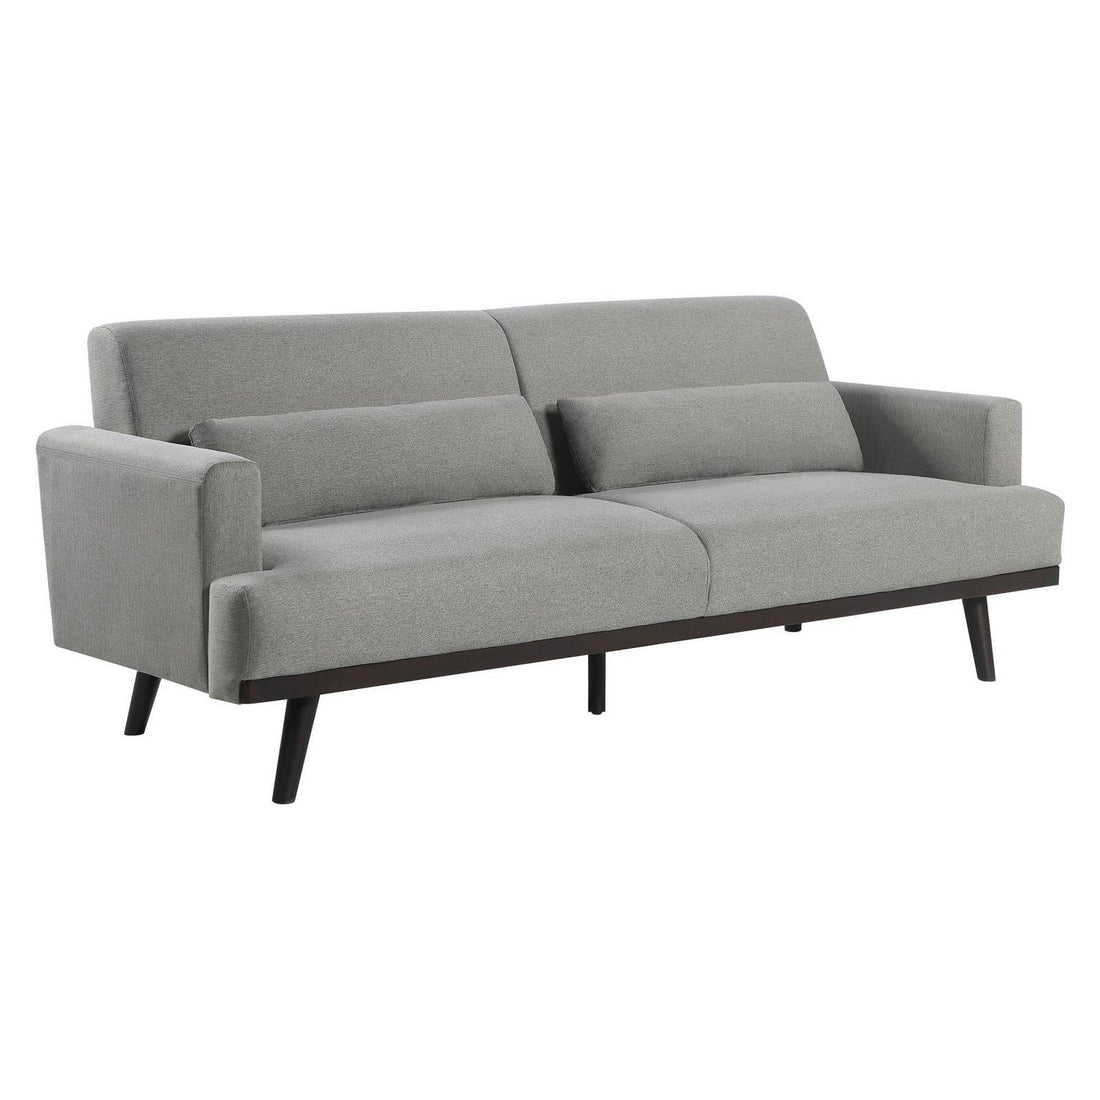 Blake Upholstered Sofa with Track Arms Sharkskin and Dark Brown 511121